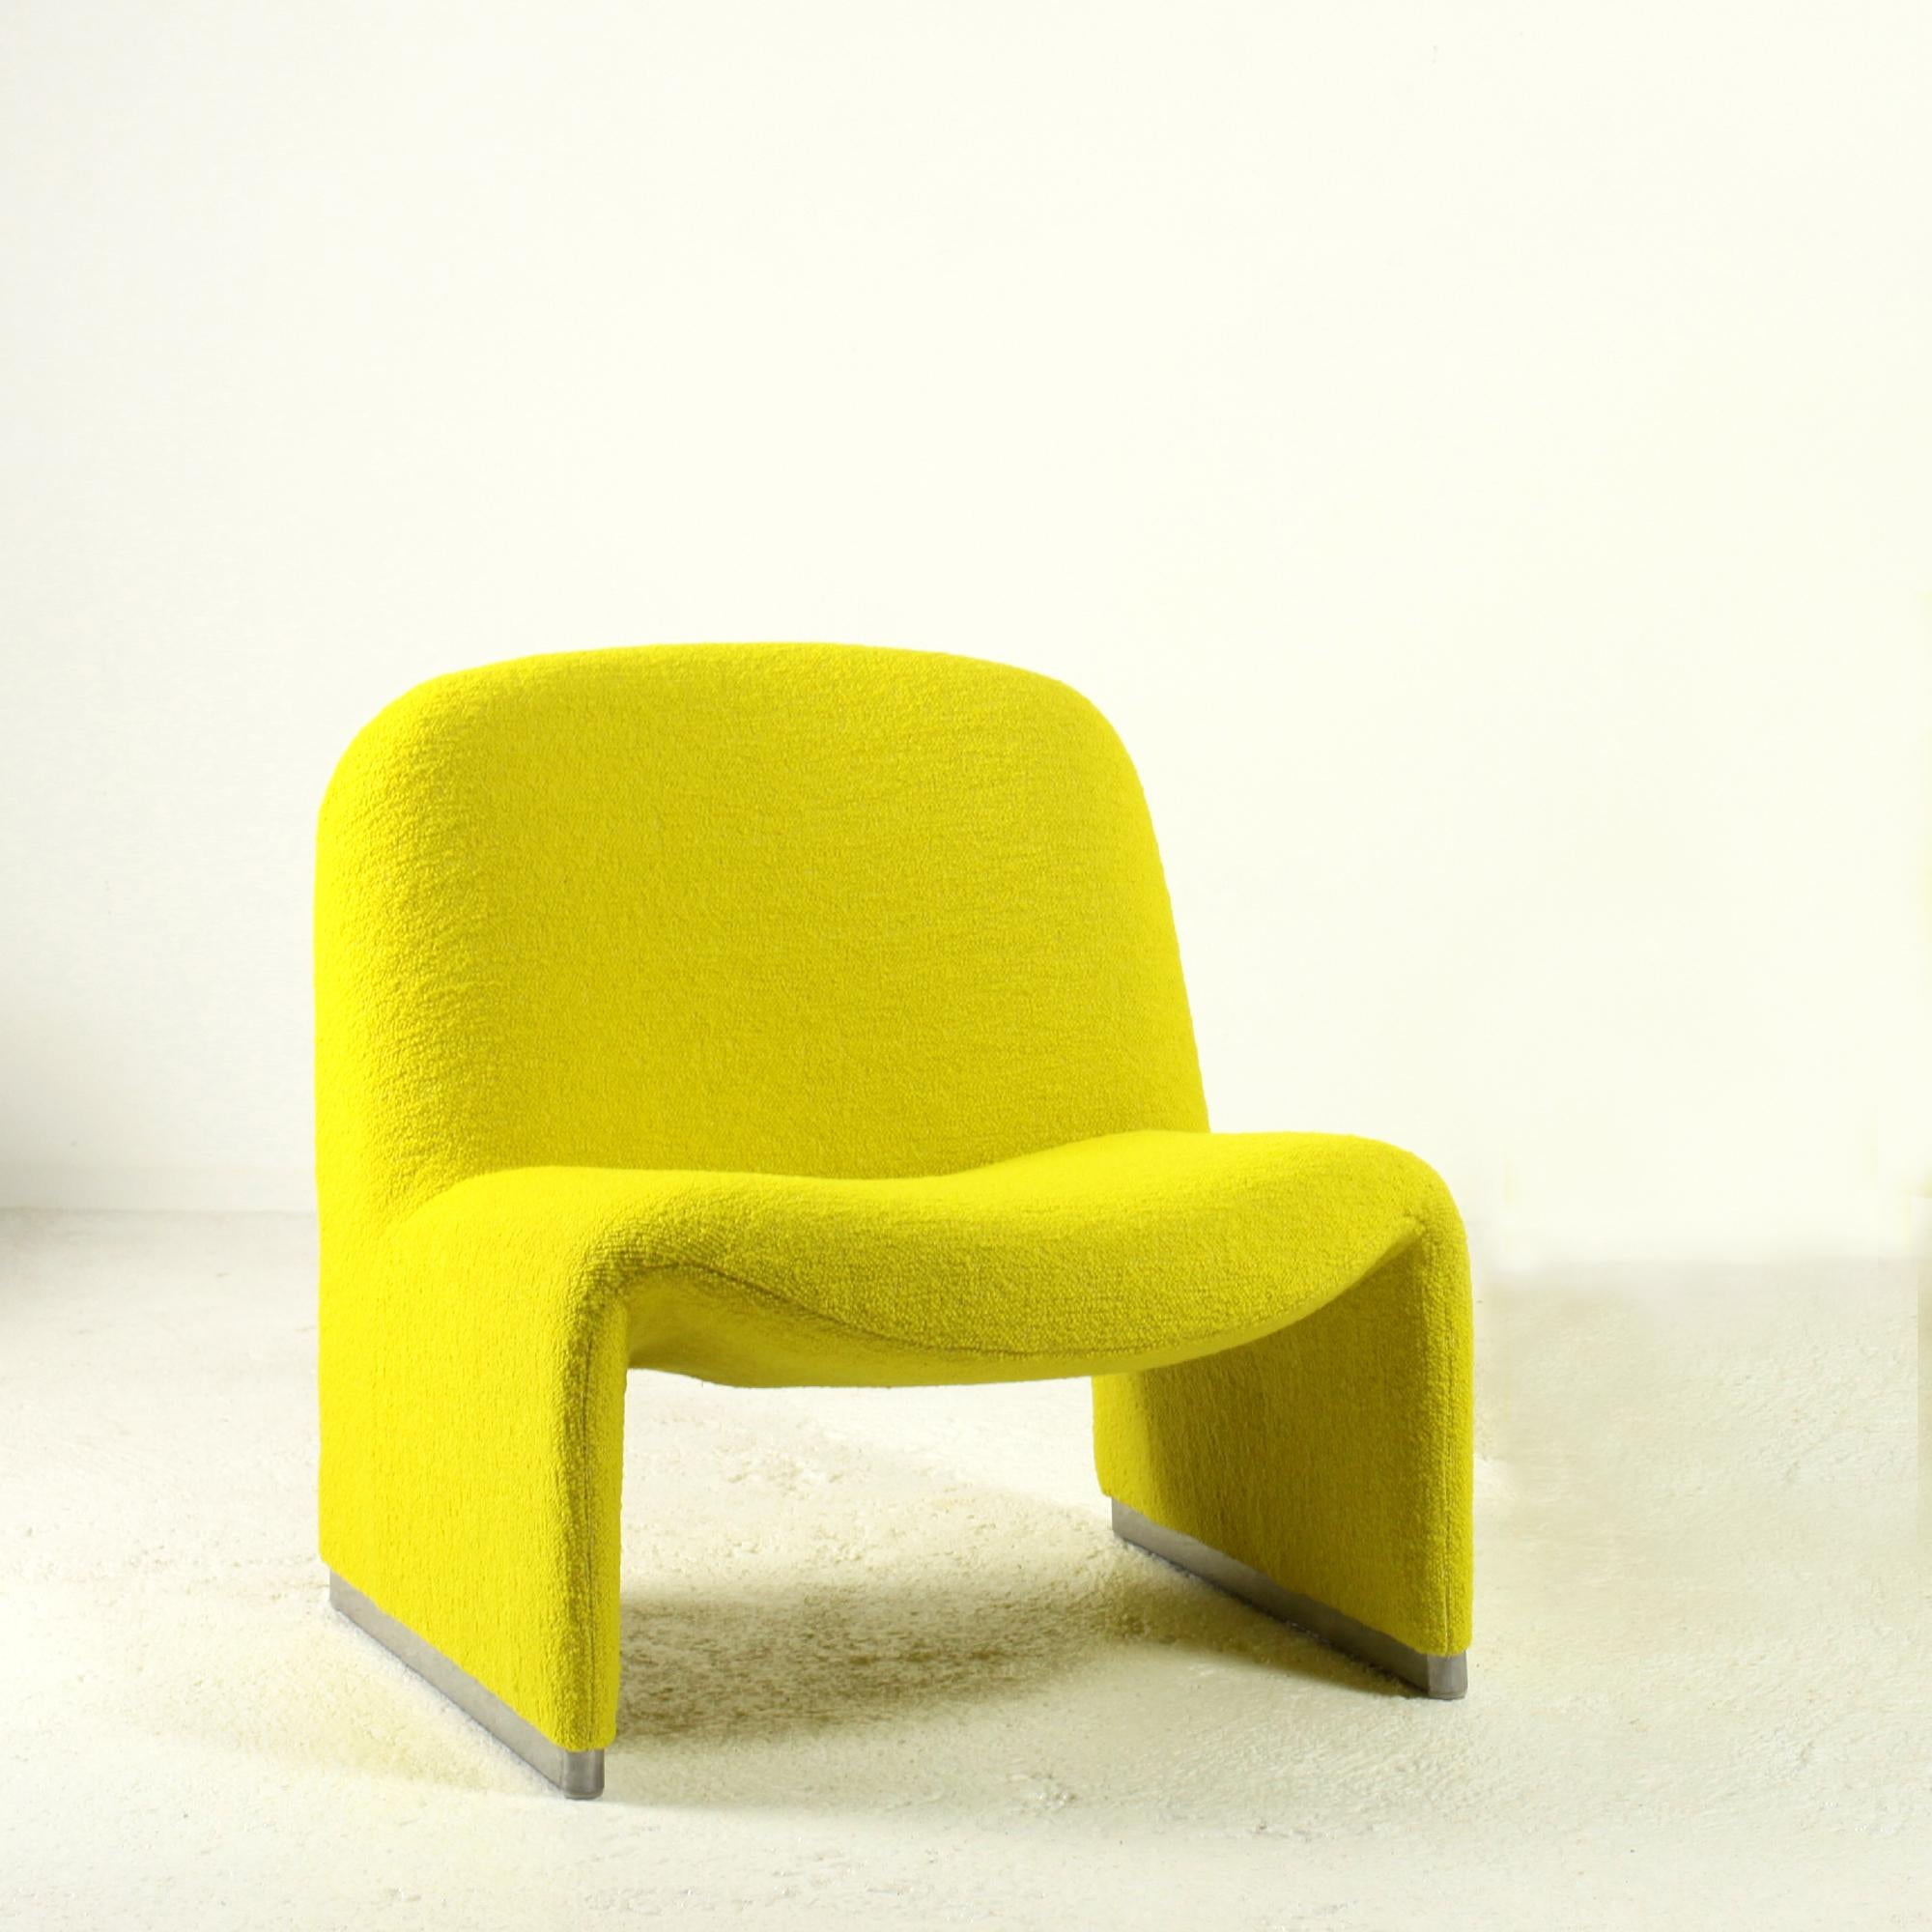 Iconic 'Alky' lounge chair newly reupholstered in italian yellow bouclé
Designed by Giancarlo Piretti for Anonima Castelli in the late 60s.
These lounges are known for their comfortable seating and iconic Italian design with nice clear line.